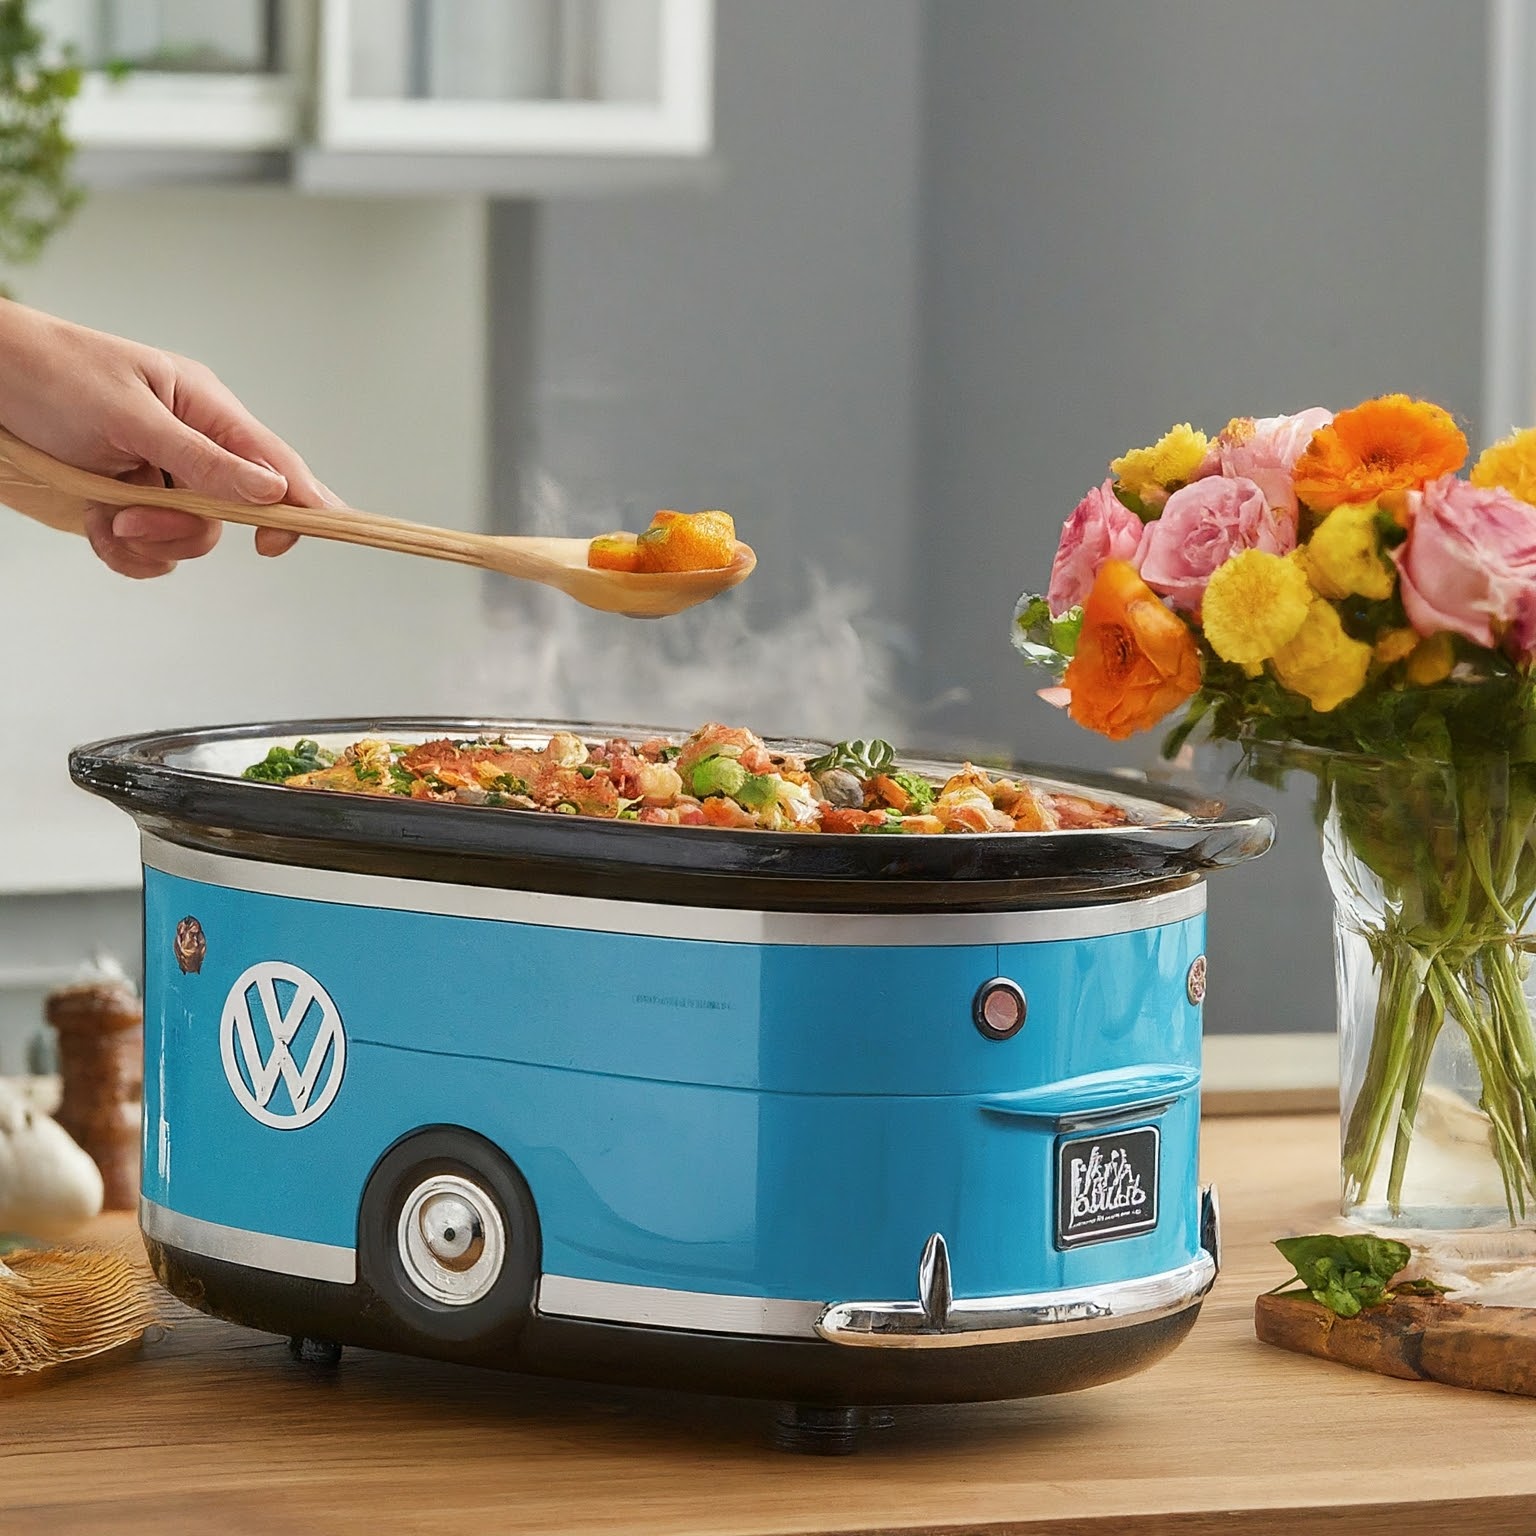 Volkswagen Bus Shaped Slow Cookers: Infusing Retro Vibes into Your Kitchen Adventure luxarts volkswagen bus slow cookers 8